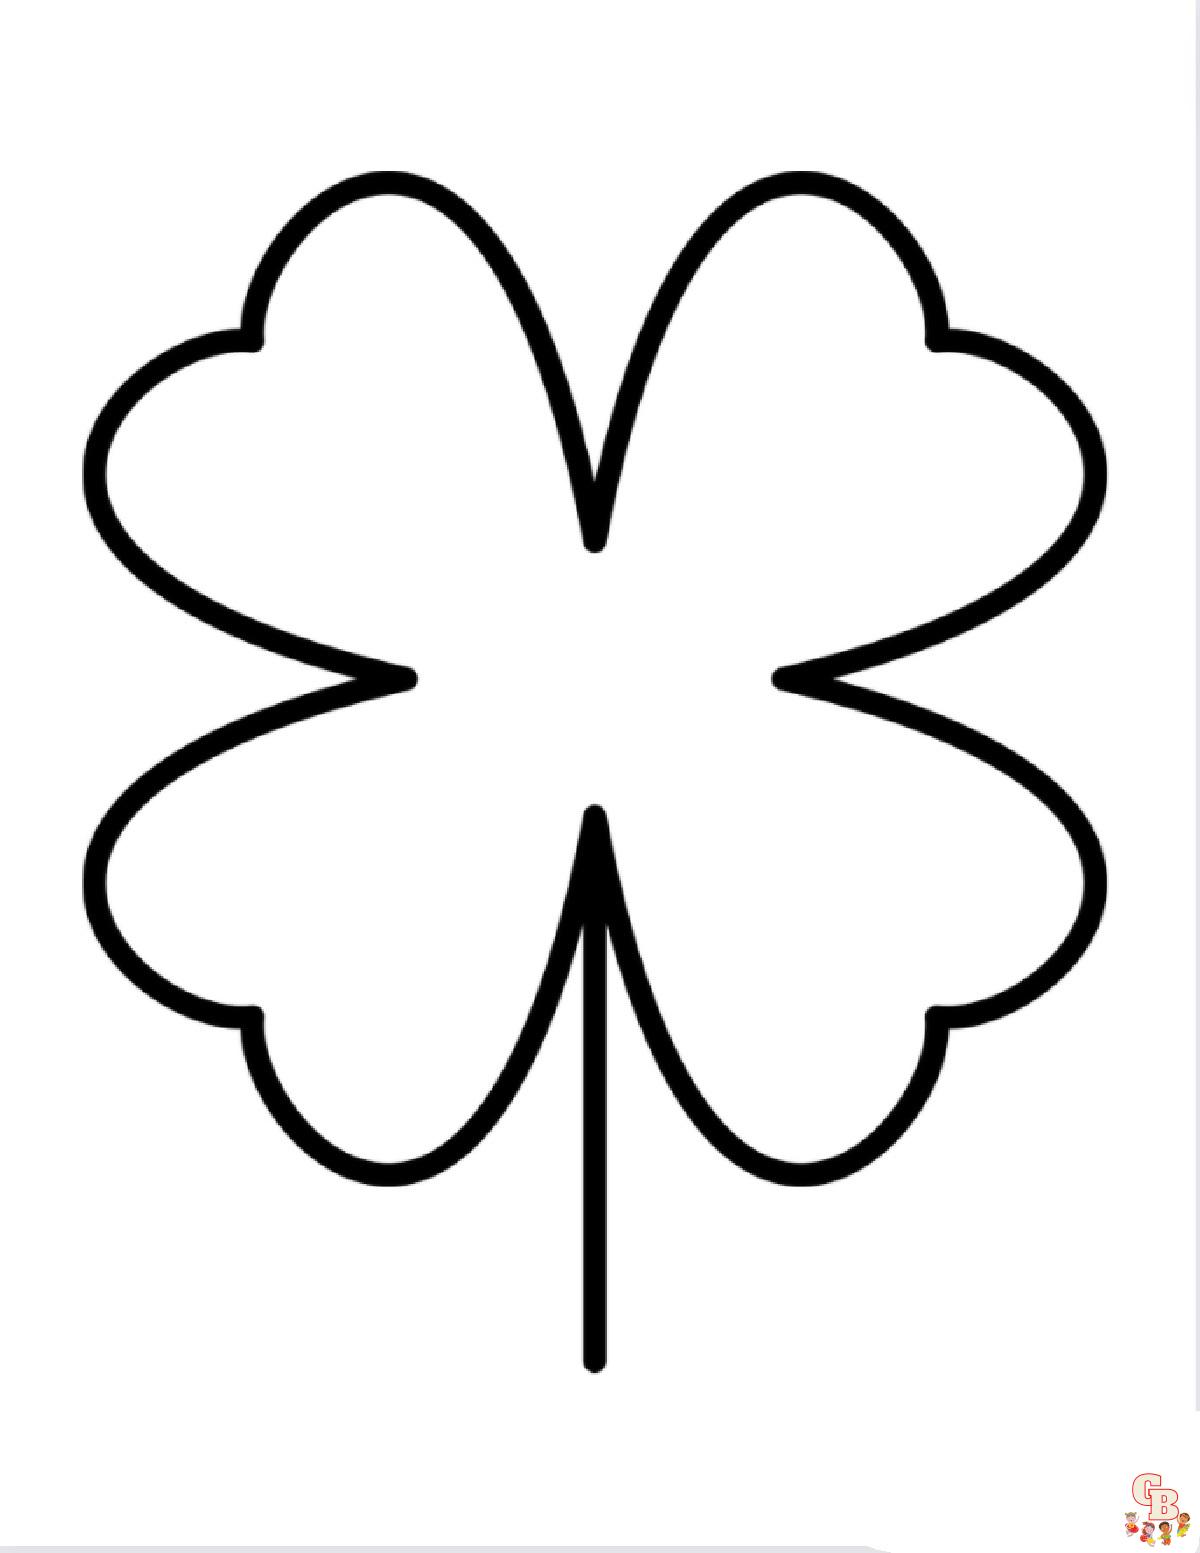 Four Leaf Clover Coloring Pages Printable Free Easy Coloring